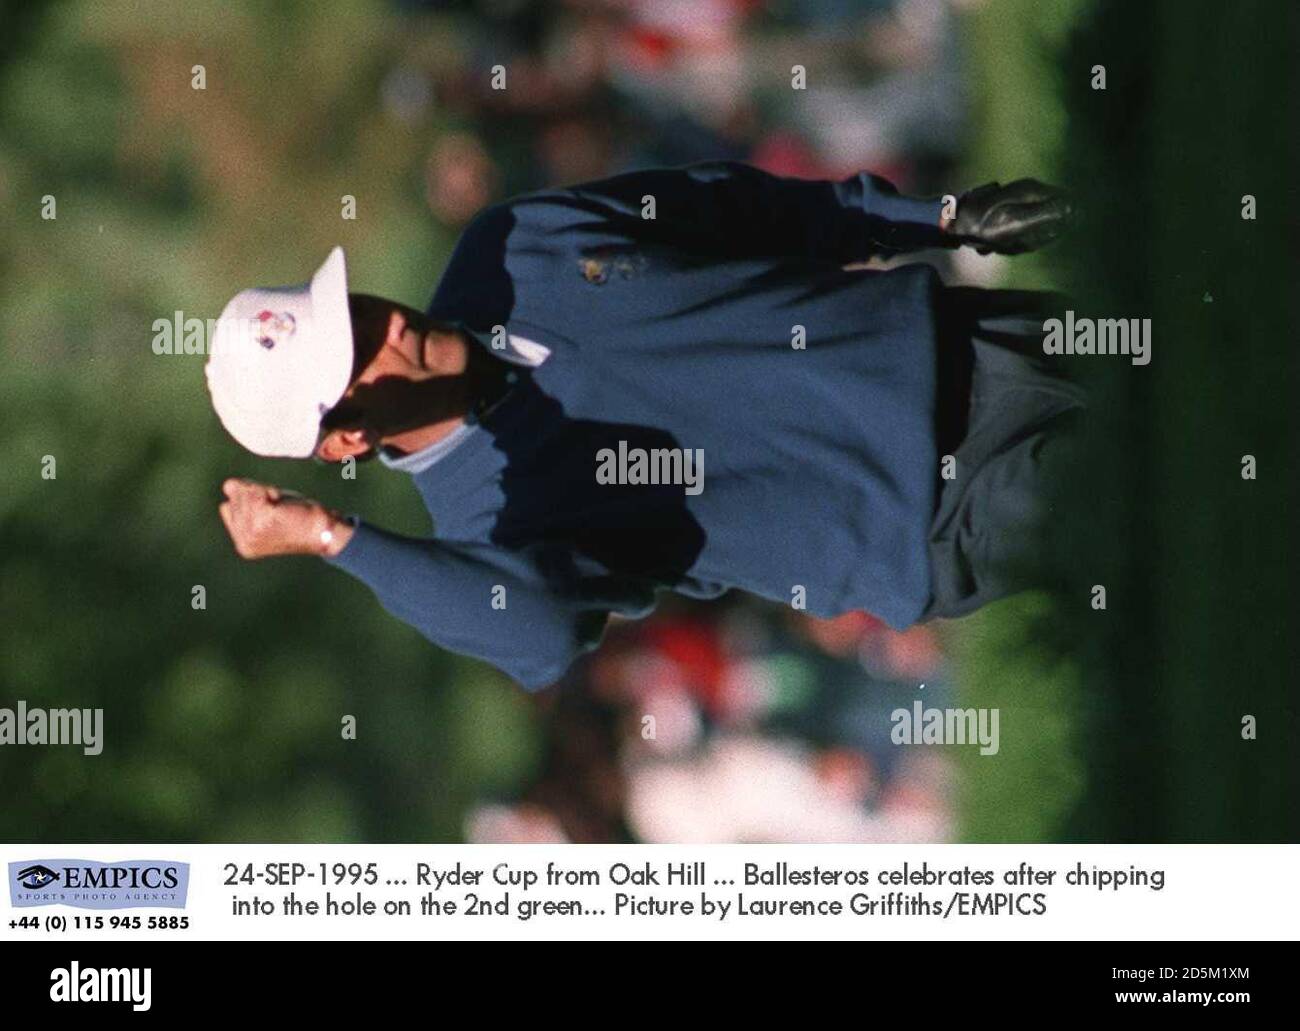 24-SEP-1995 ... Ryder Cup from Oak Hill ... Ballesteros celebrates after chipping into the hole on the 2nd green.  Picture by Laurence Griffiths/EMPICS Stock Photo